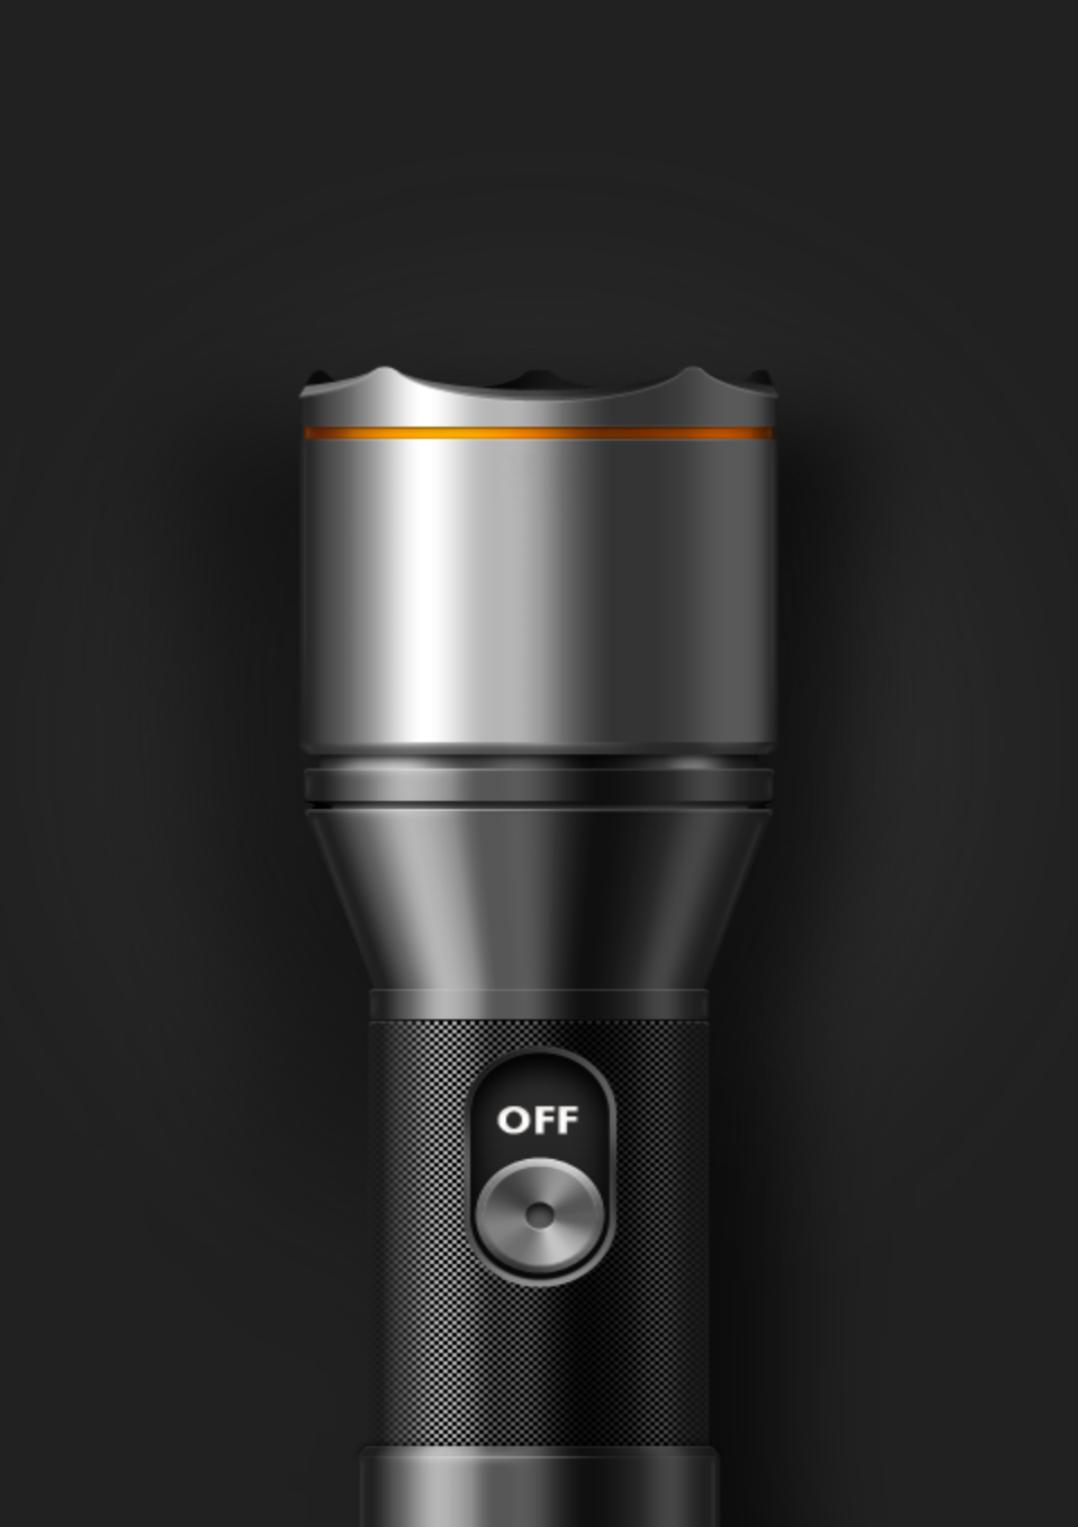 Torch package. Flashlight.